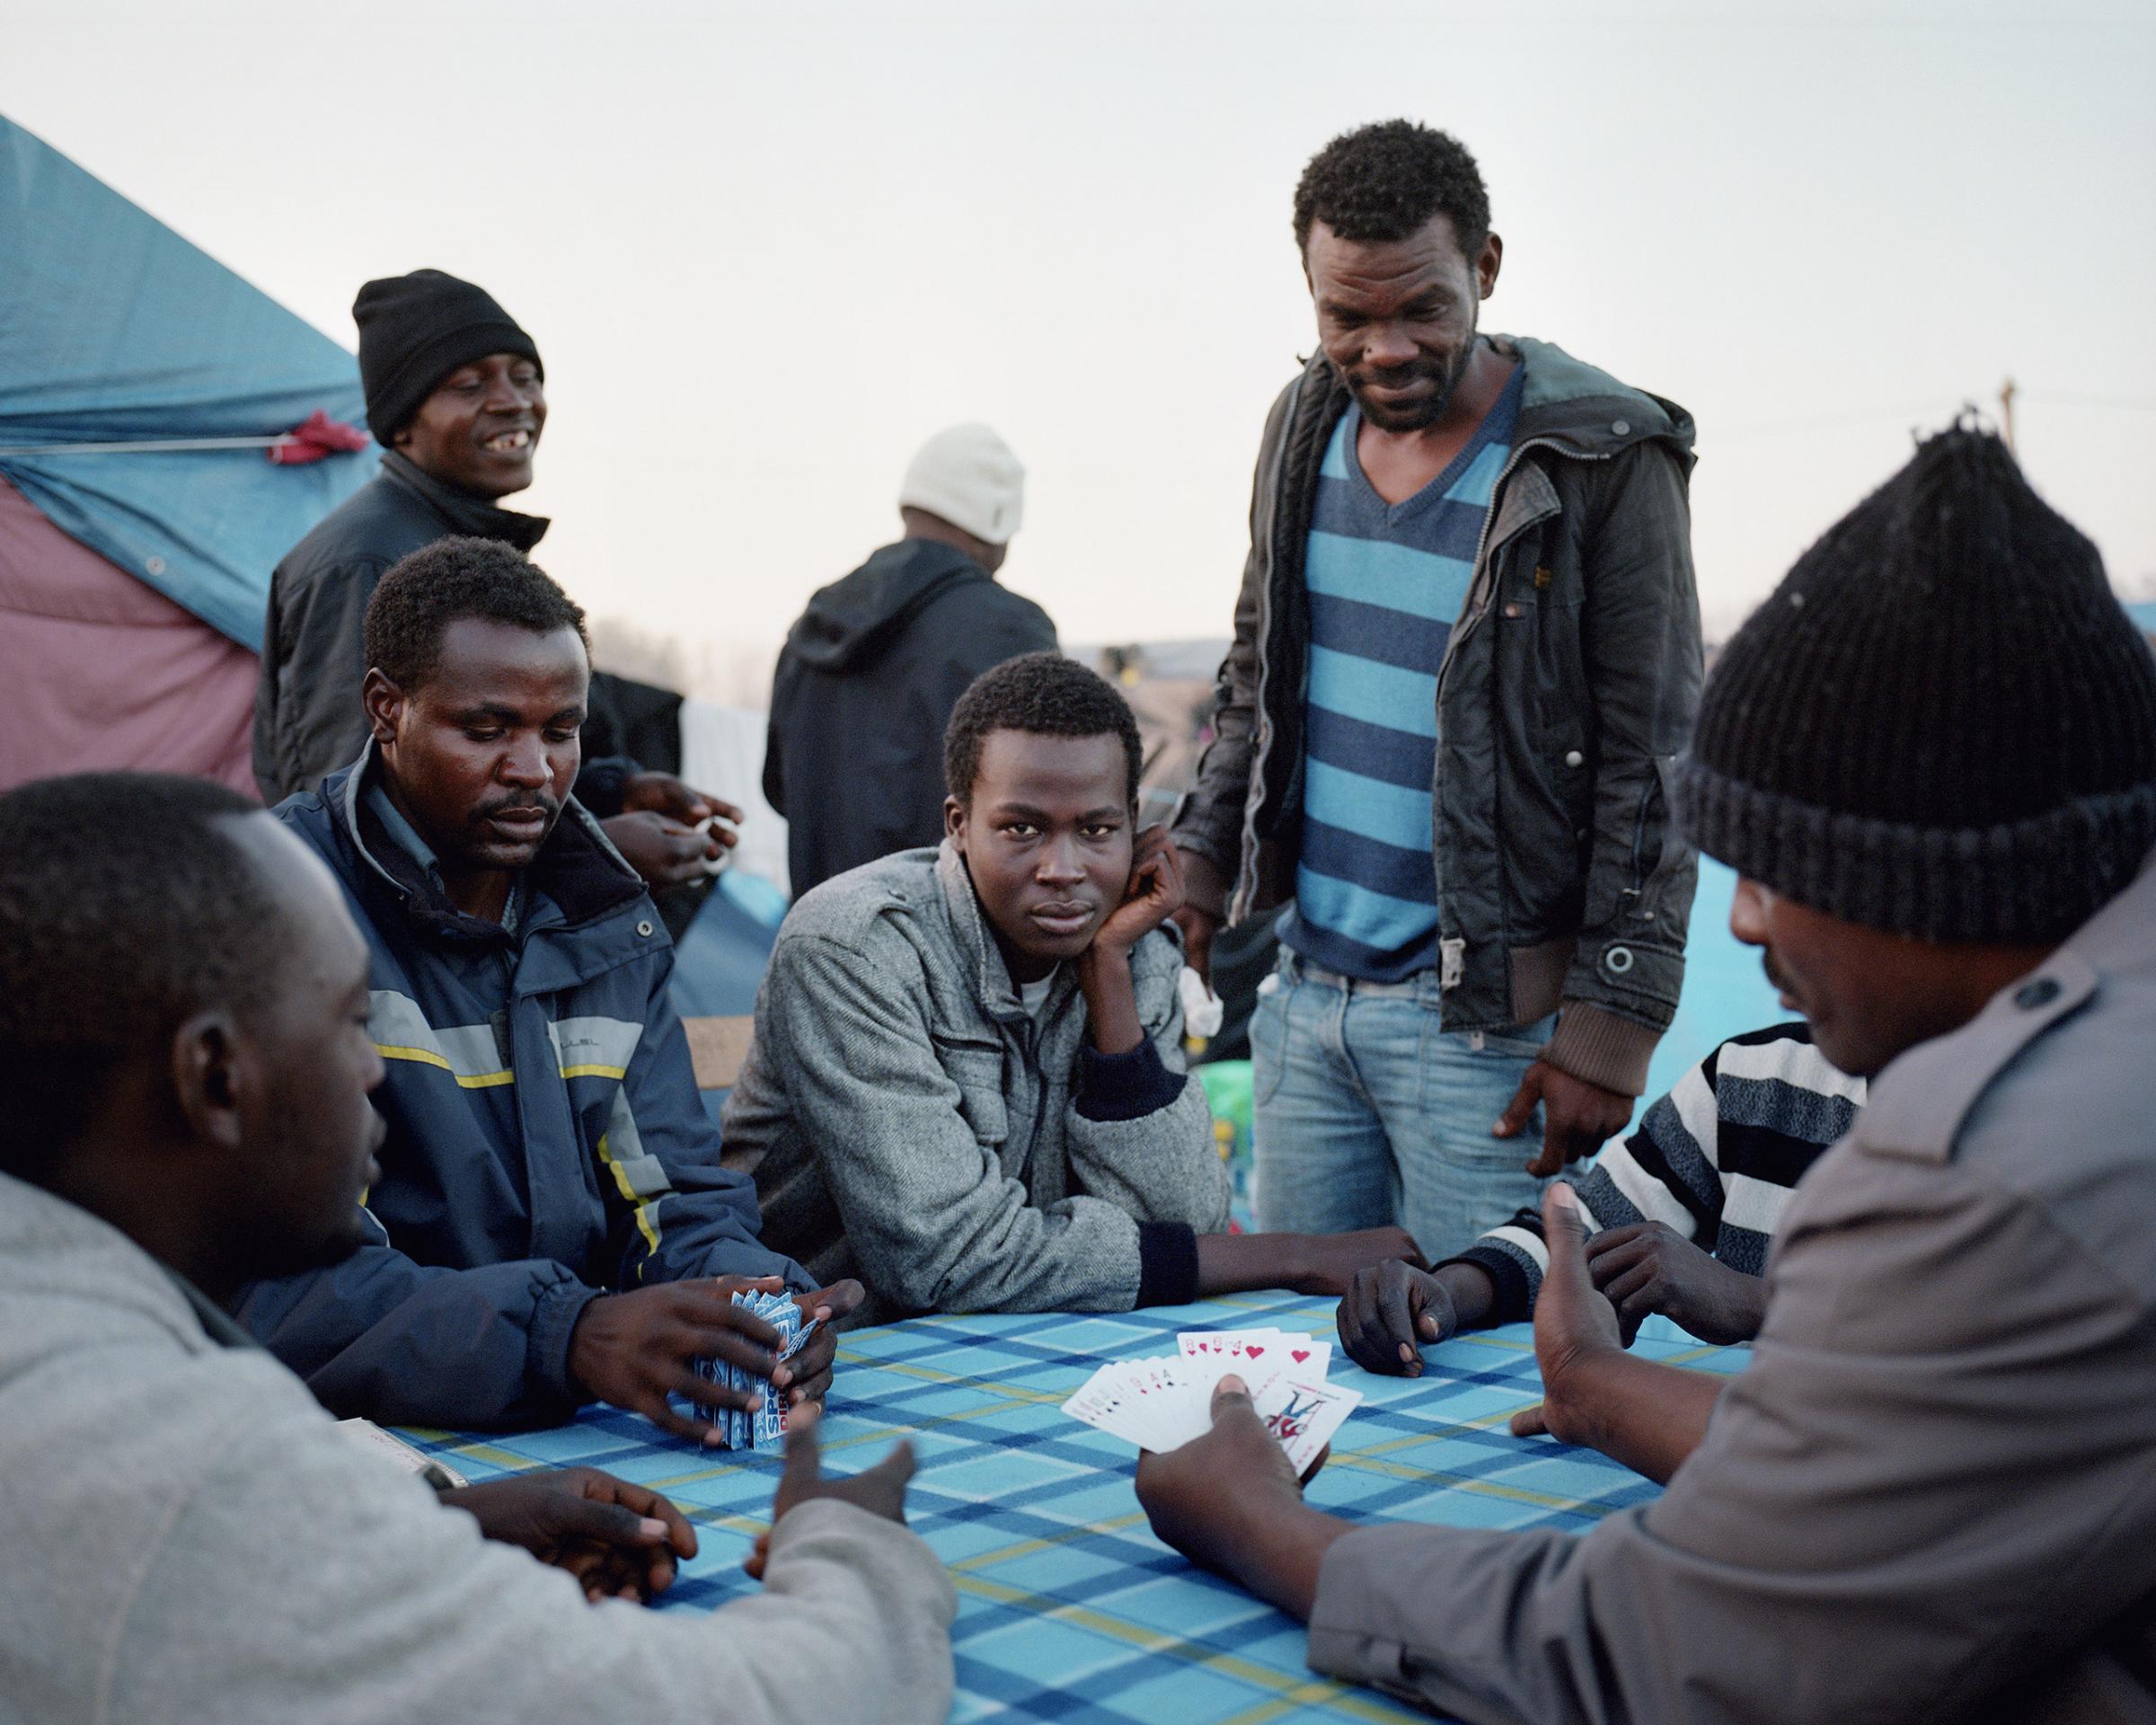 Sudanese men play cards to pass the time in the Calais "Jungle".